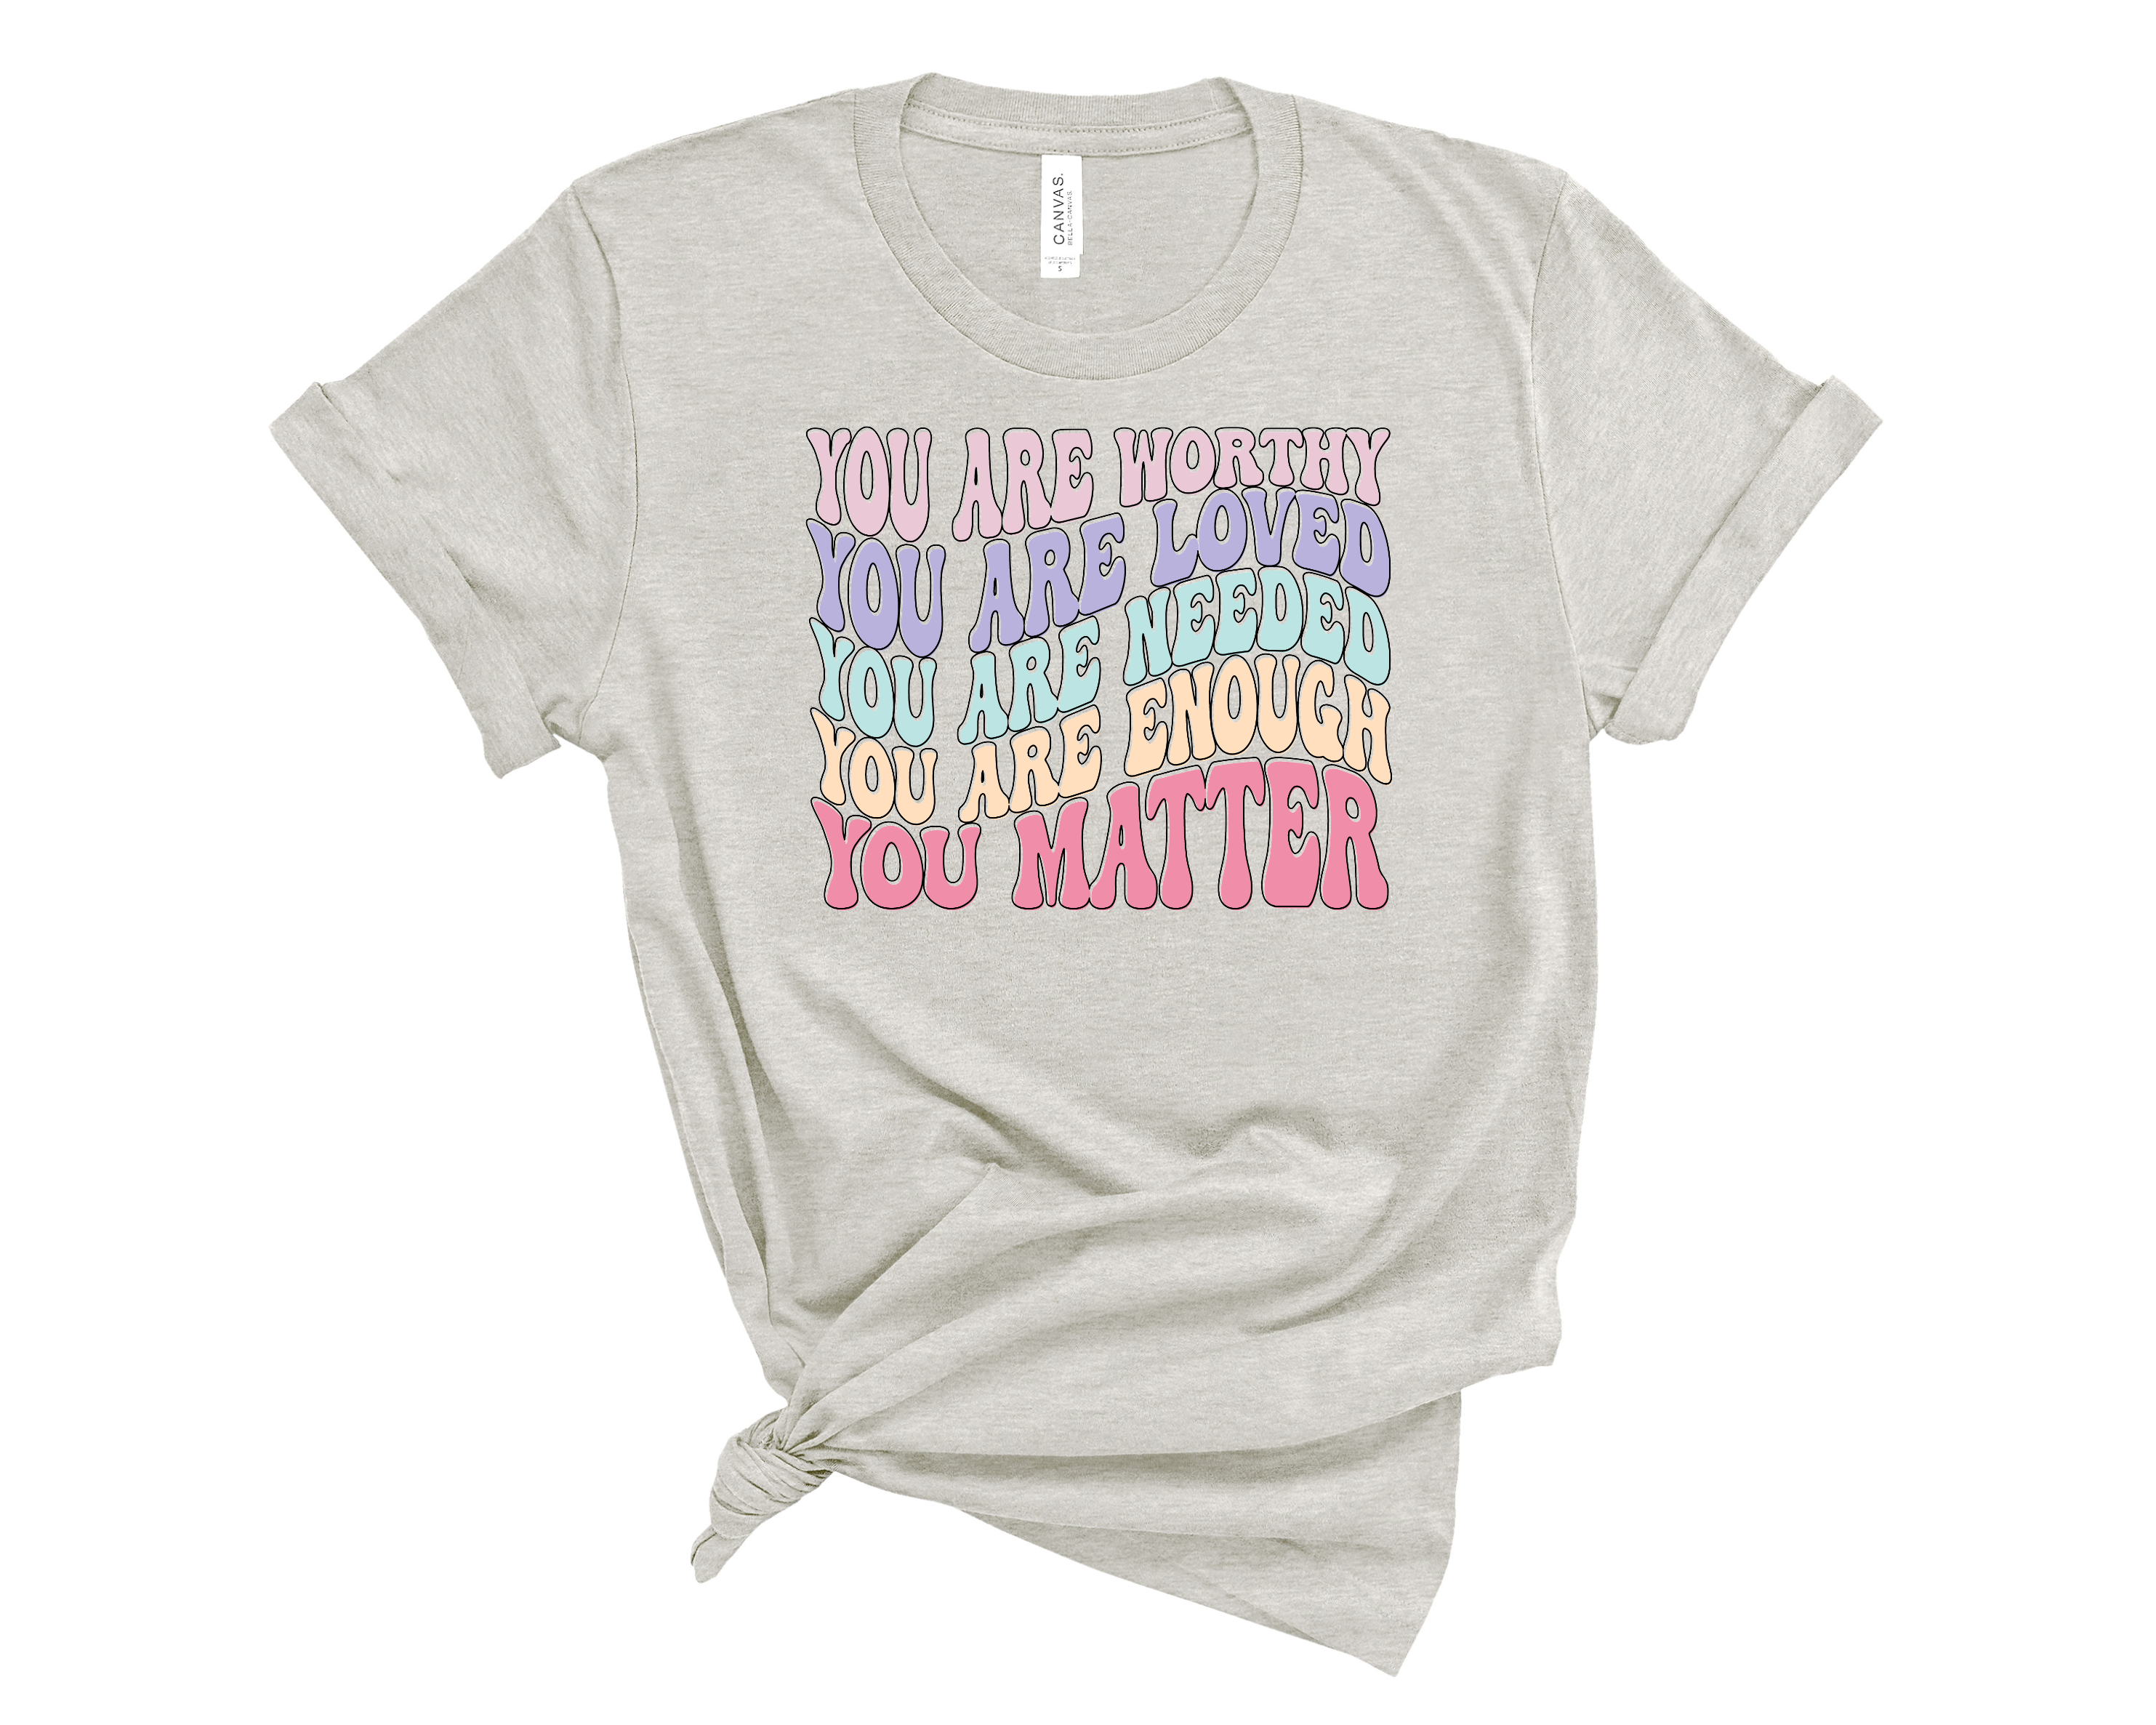 Mental Health Awareness Fundraiser Shirts - You Are Worthy